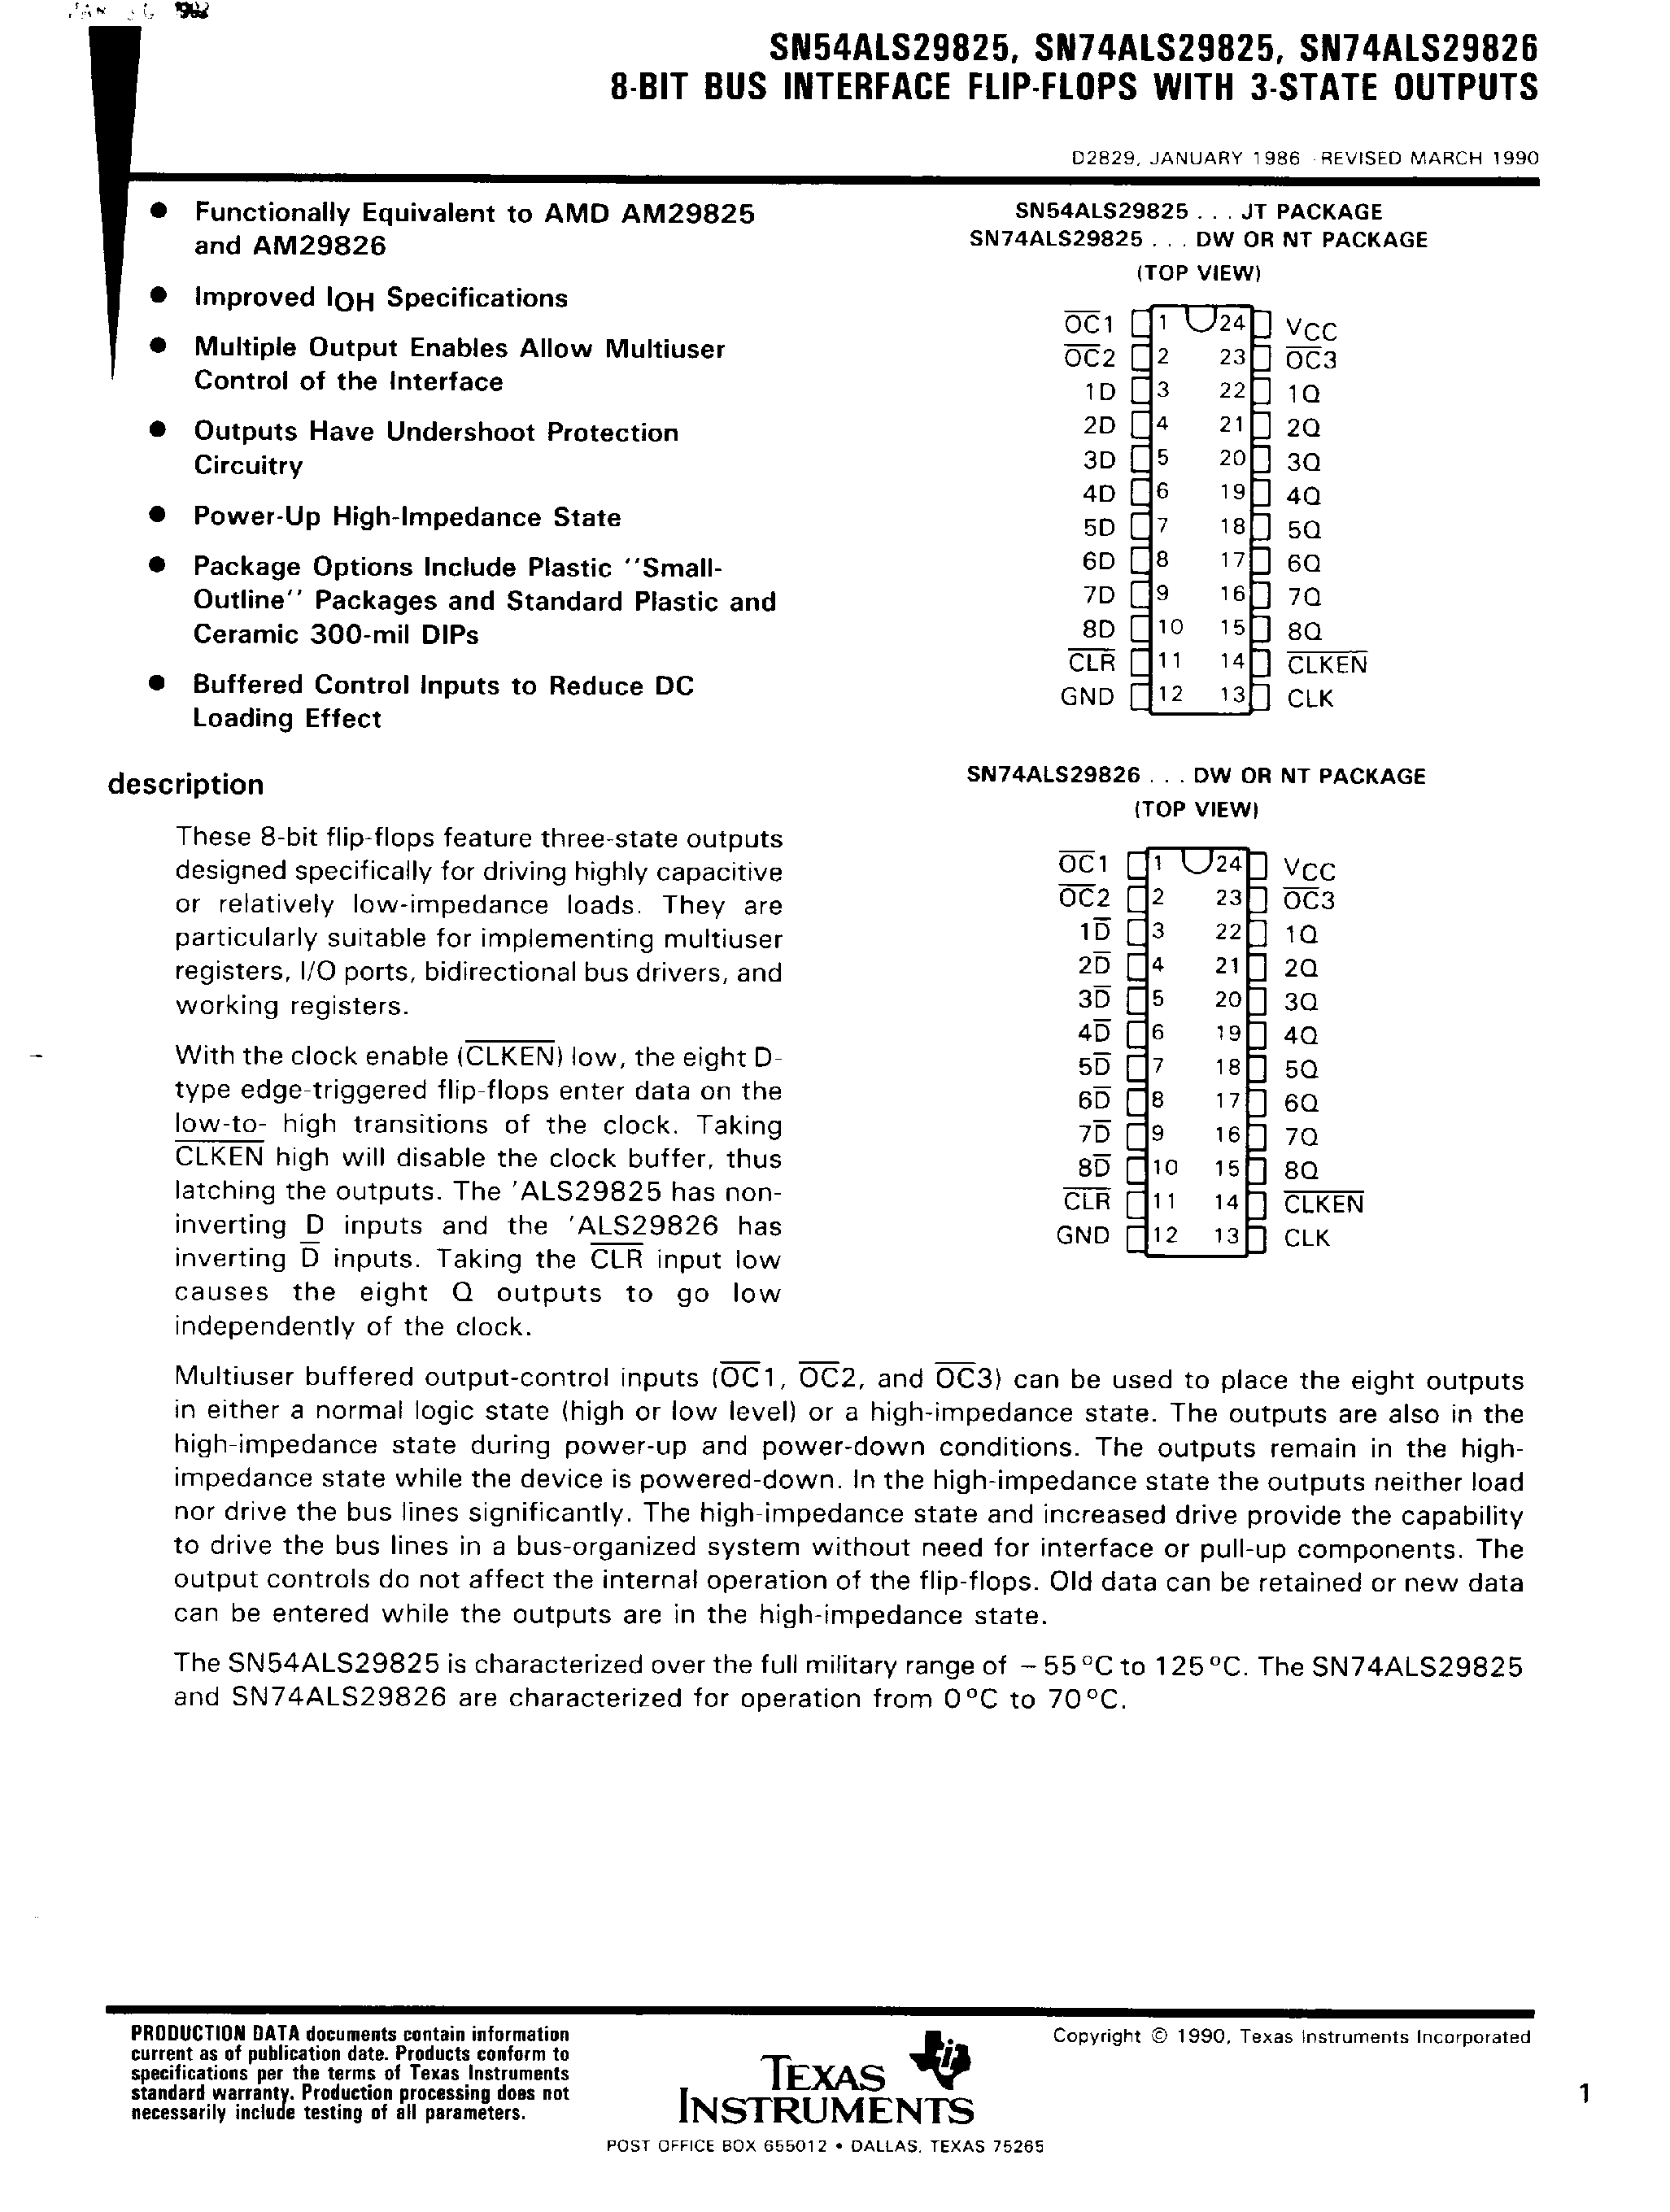 Datasheet SN74ALS29825 - (SN74ALS29826) 8 Bit Bus Interface F-F with 3 State Outputs page 1